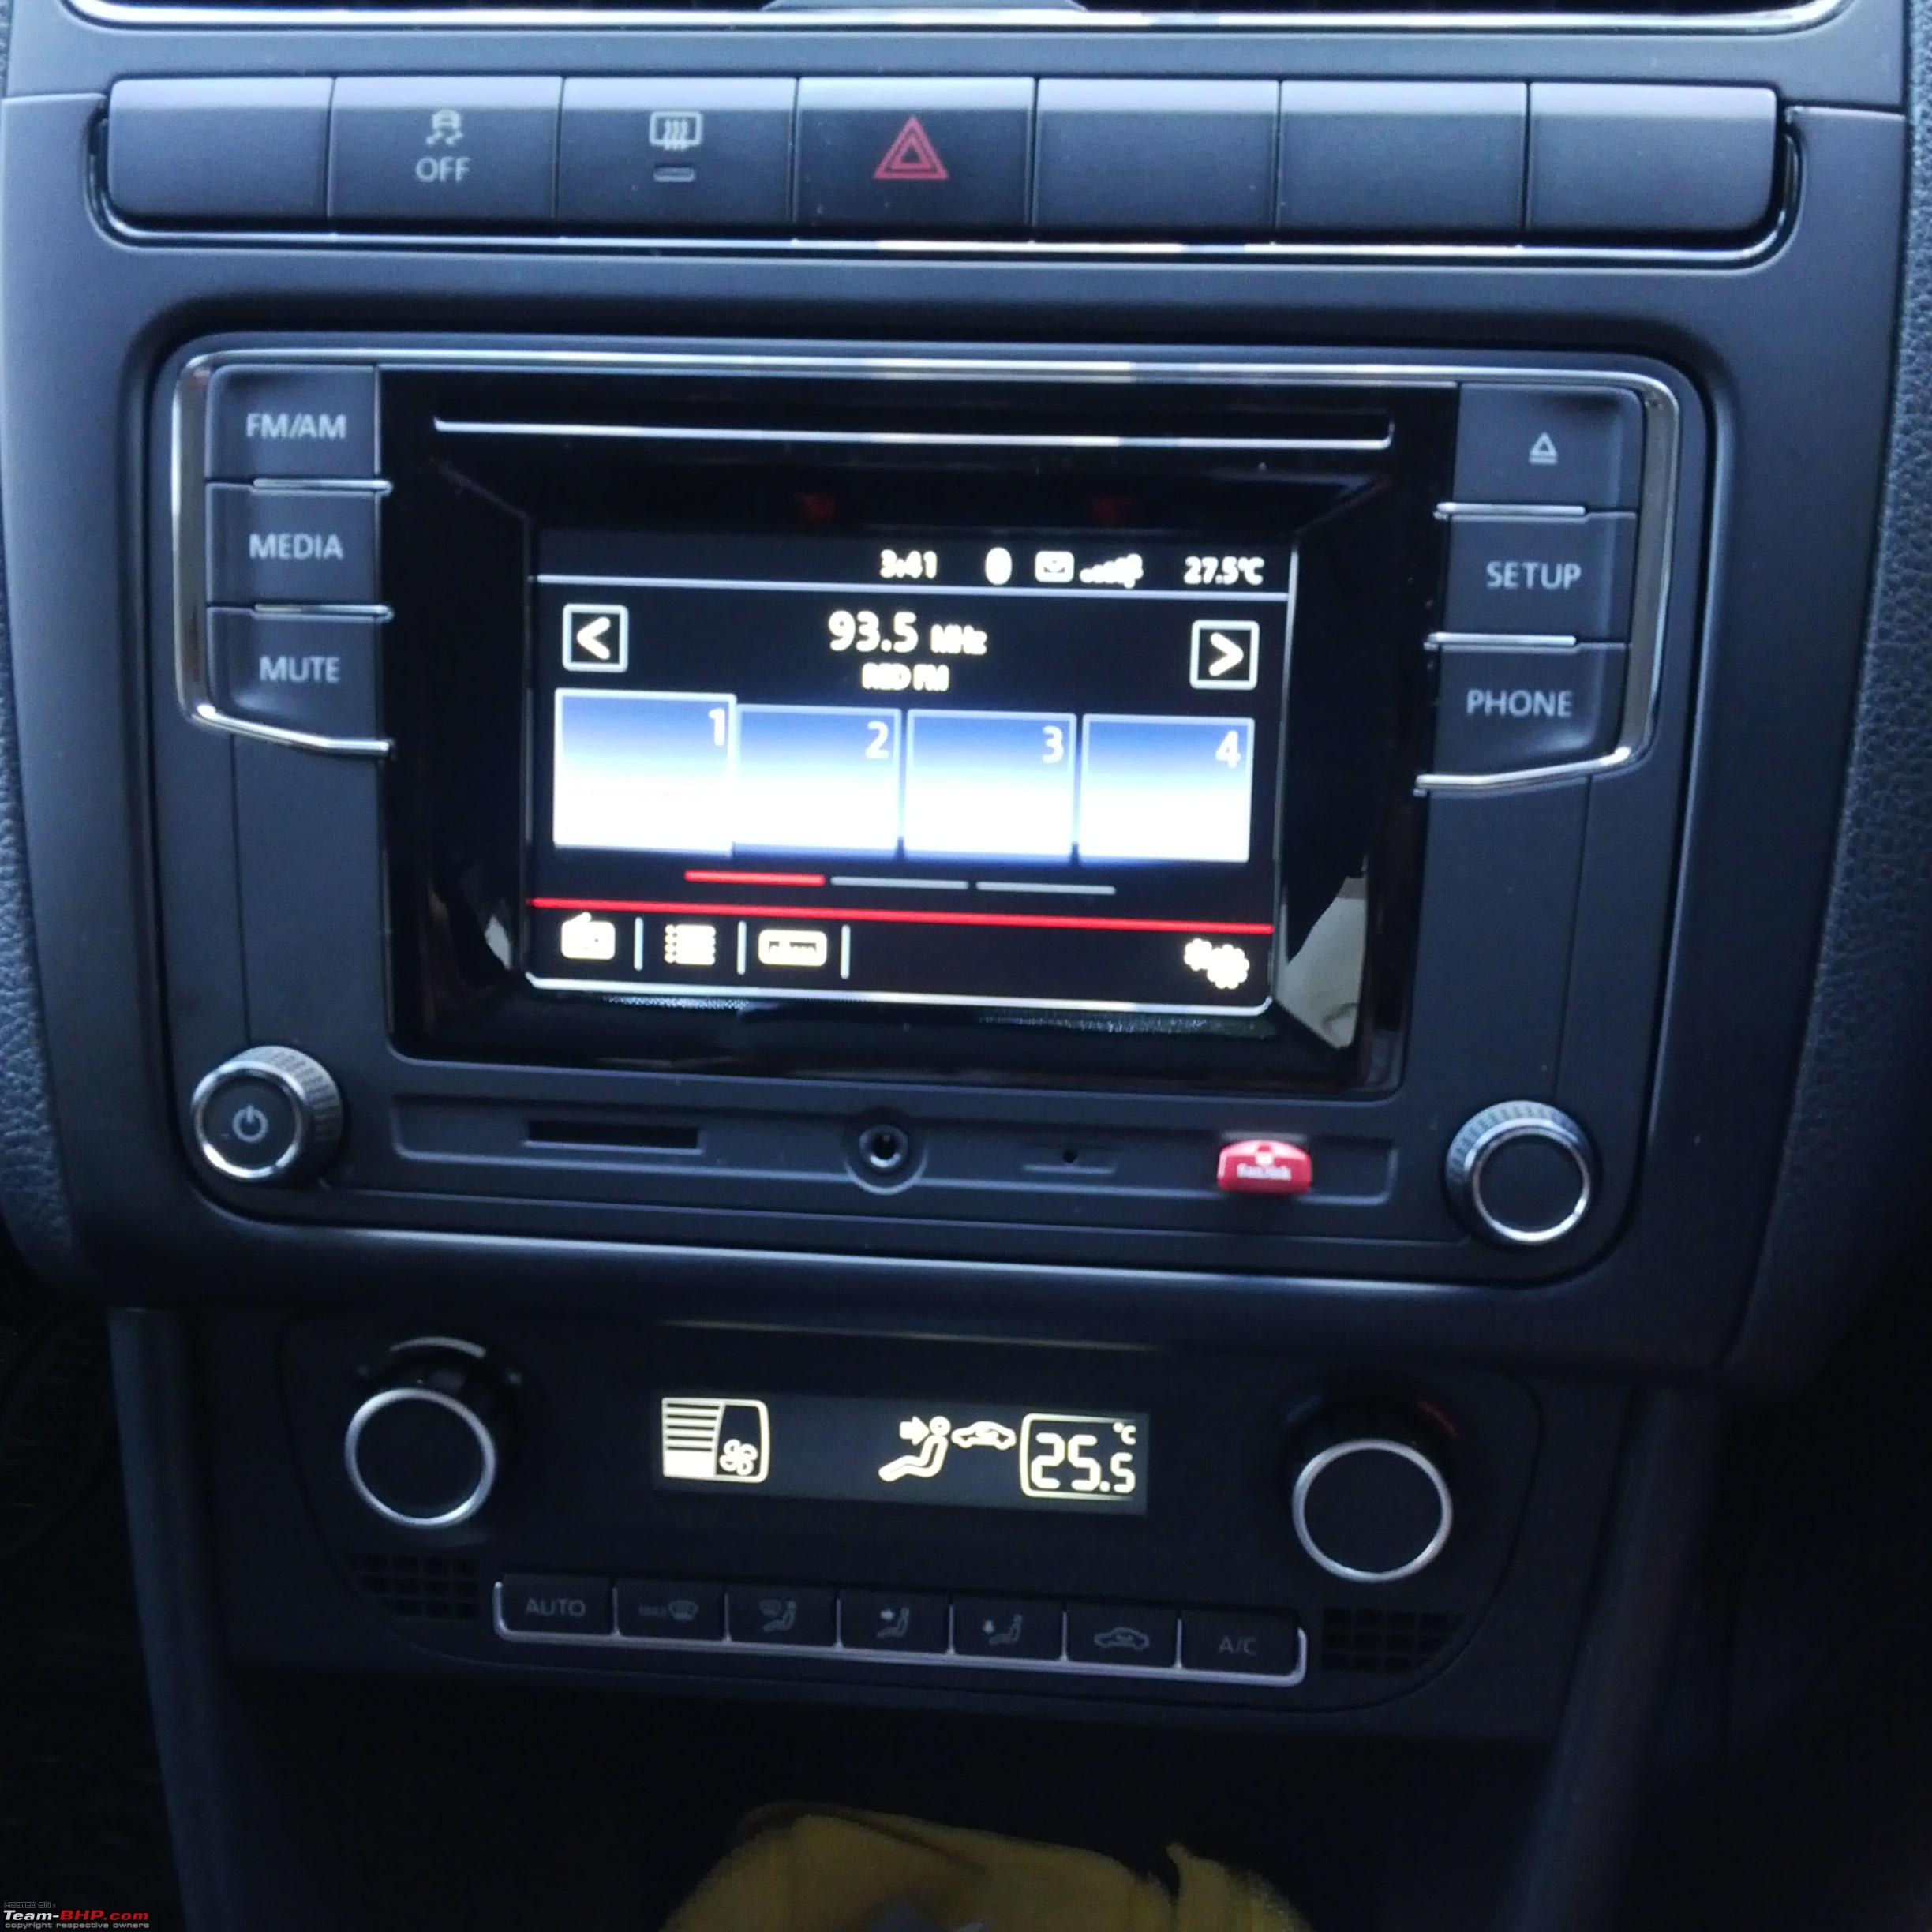 Review: RCD 330G. VW's 2016 Head-Unit for the Polo, Vento & Ameo - Page ...